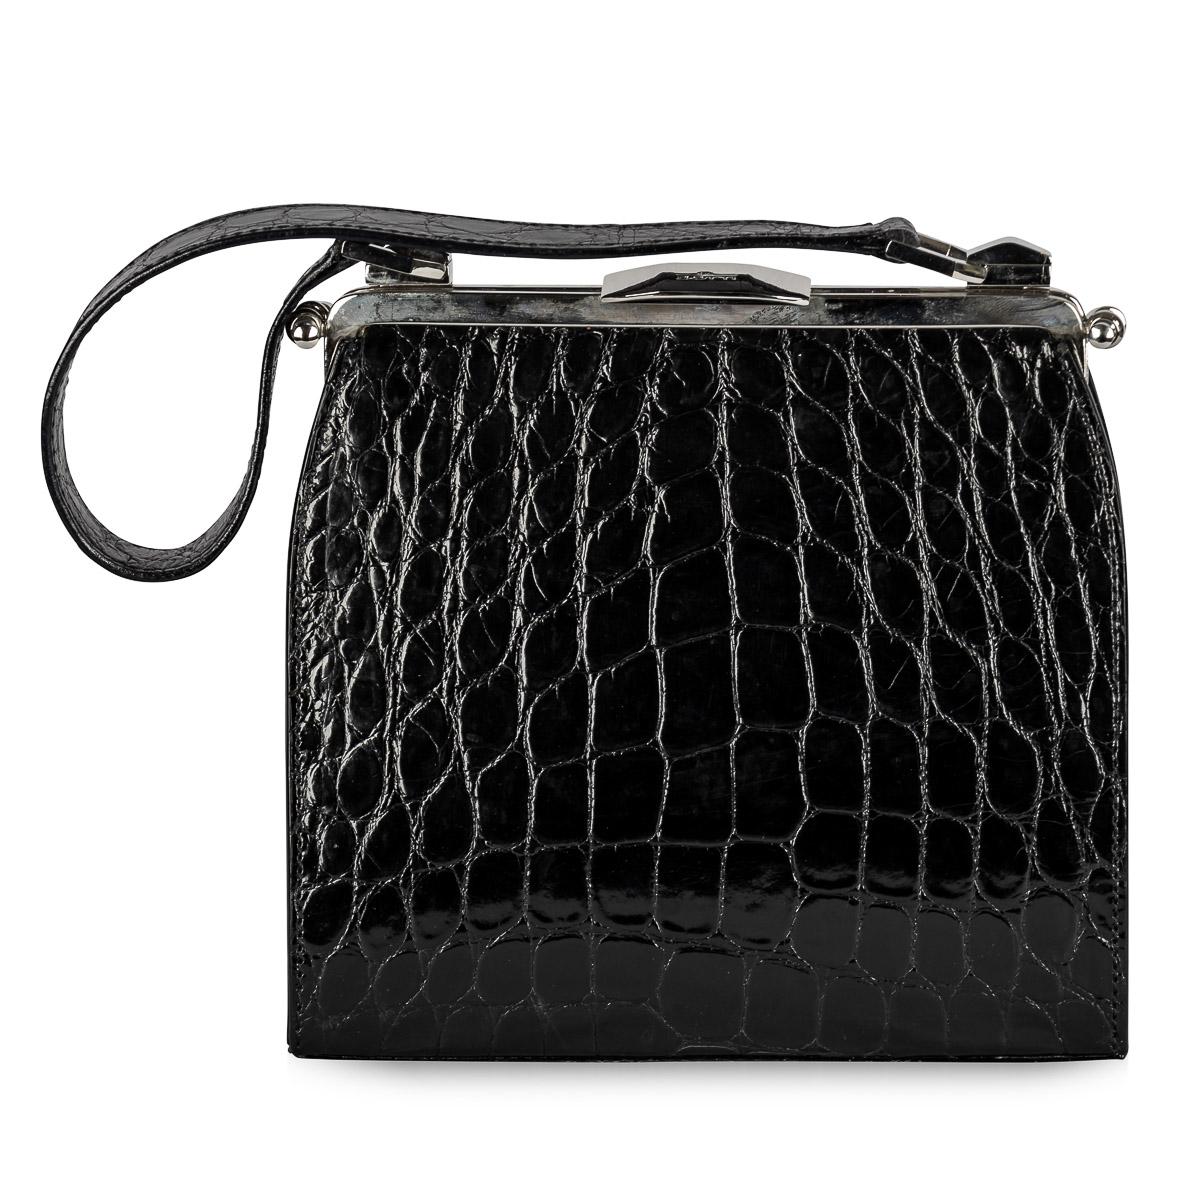 Crafted by Dotti in Roma, Italy during the early 21st Century, this handbag boasts black crocodile leather adorning both its exterior and handle. Palladium plated hardware throughout, from its clasp to the clam shell opening system, accentuates its